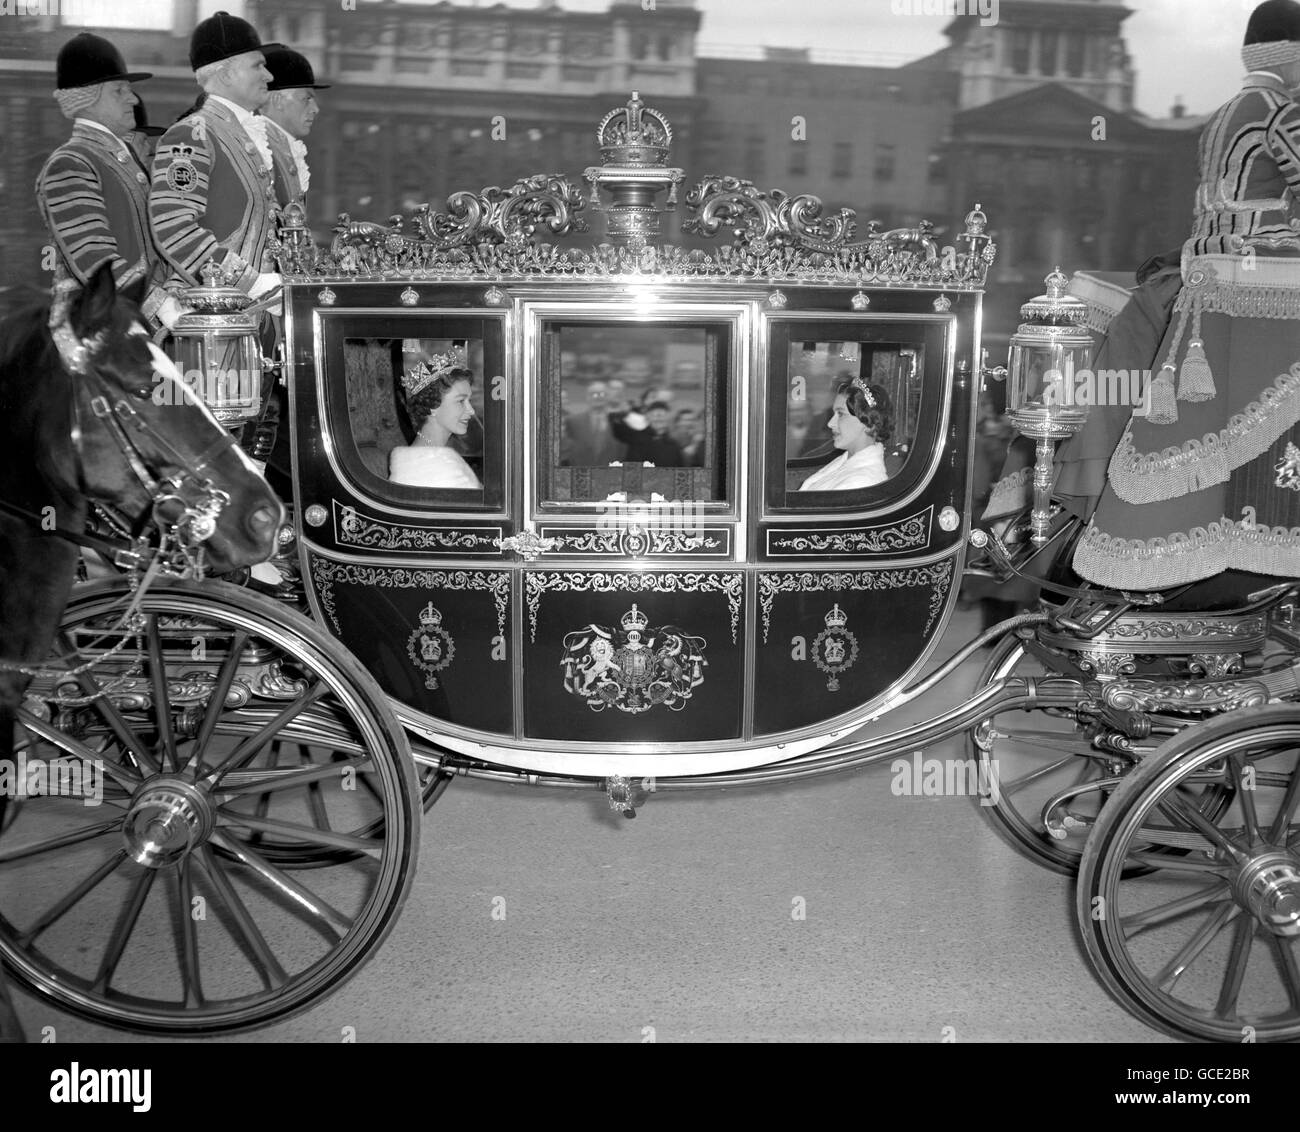 Royalty - Queen Elizabeth II - State Opening of Parliament - London Stock Photo